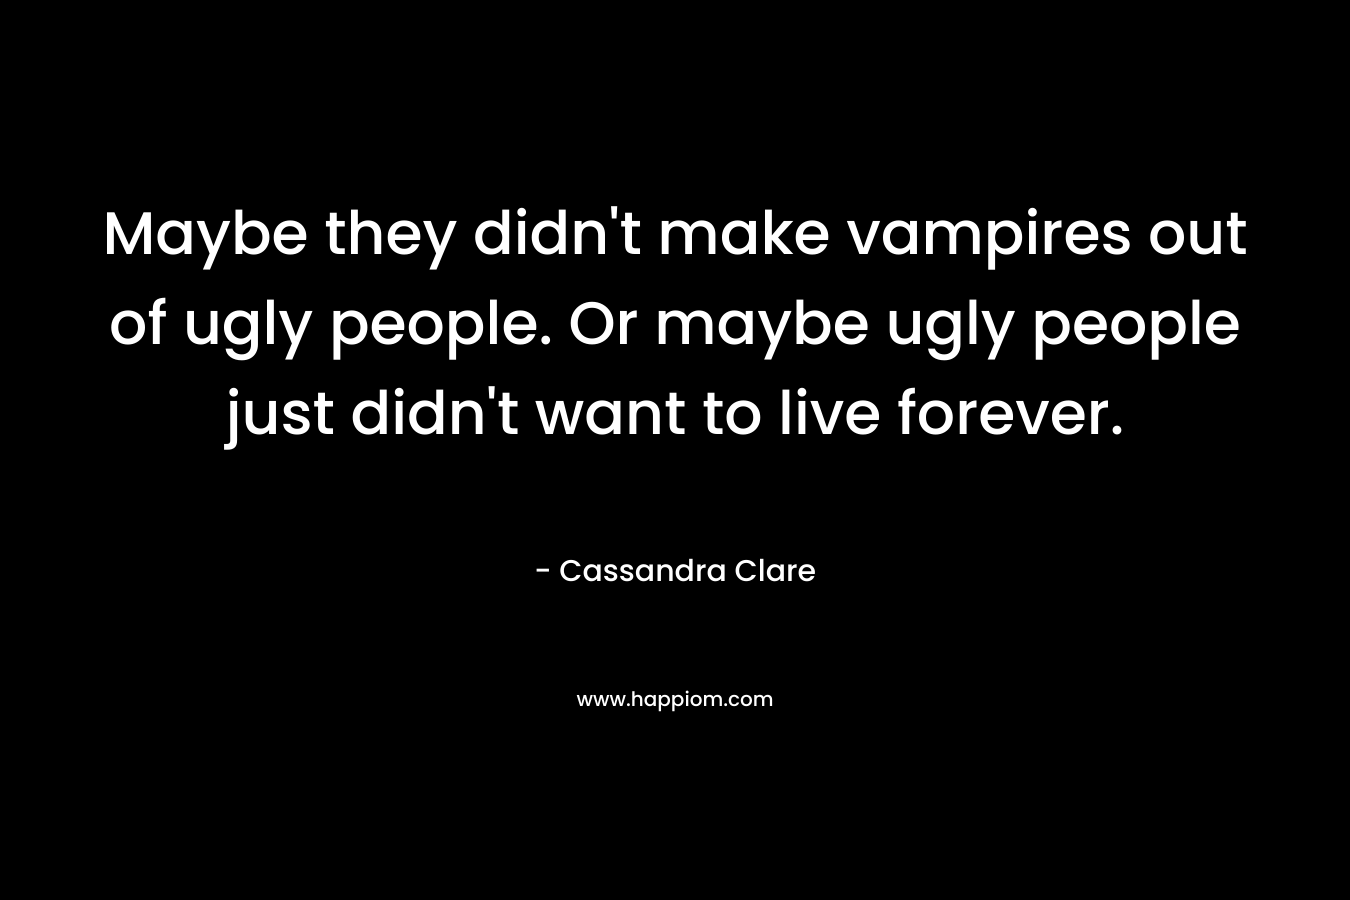 Maybe they didn't make vampires out of ugly people. Or maybe ugly people just didn't want to live forever.